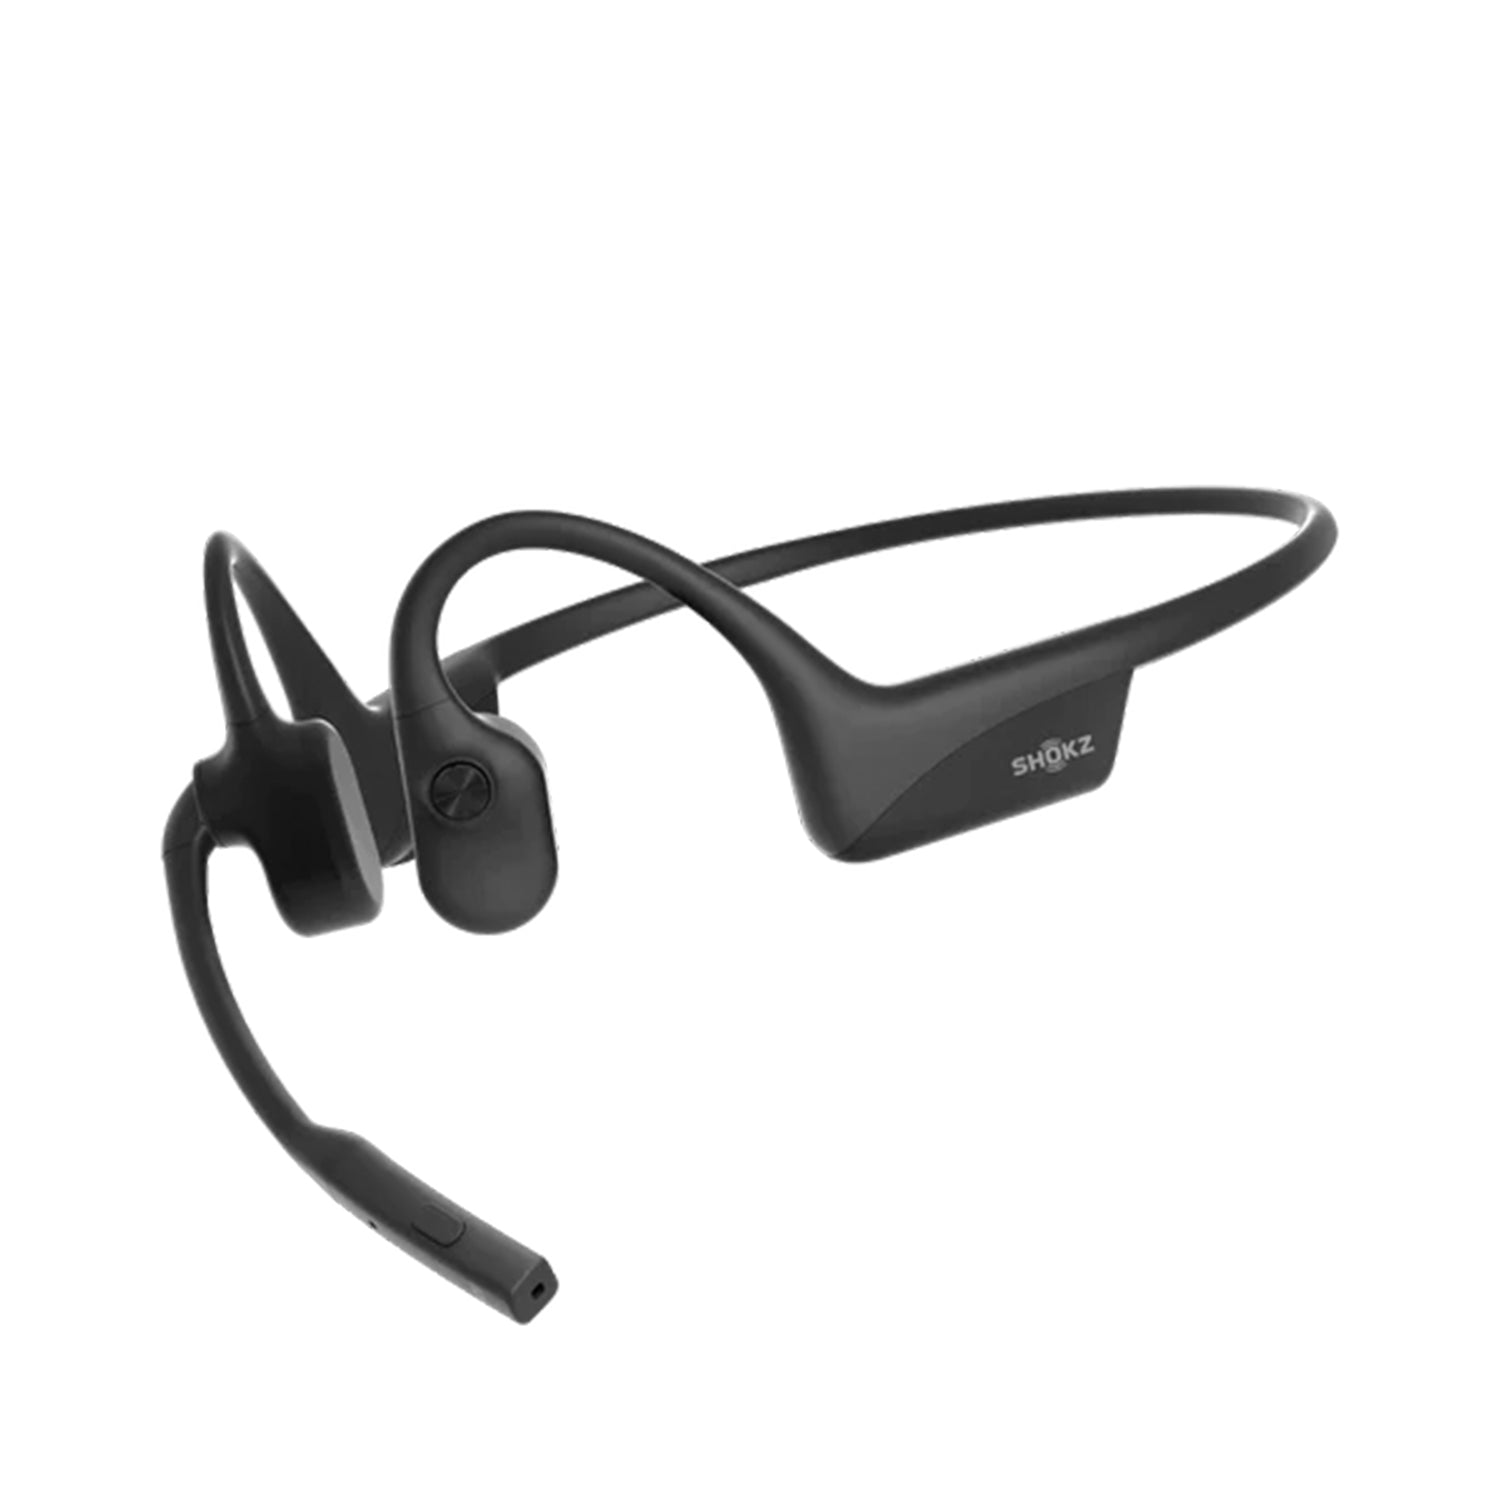 SHOKZ Opencomm 2 Open-Ear Bluetooth Headphones, 7th Generation Bone Conduction Technology With Adjustable, Dual Noise-Canceling Microphone